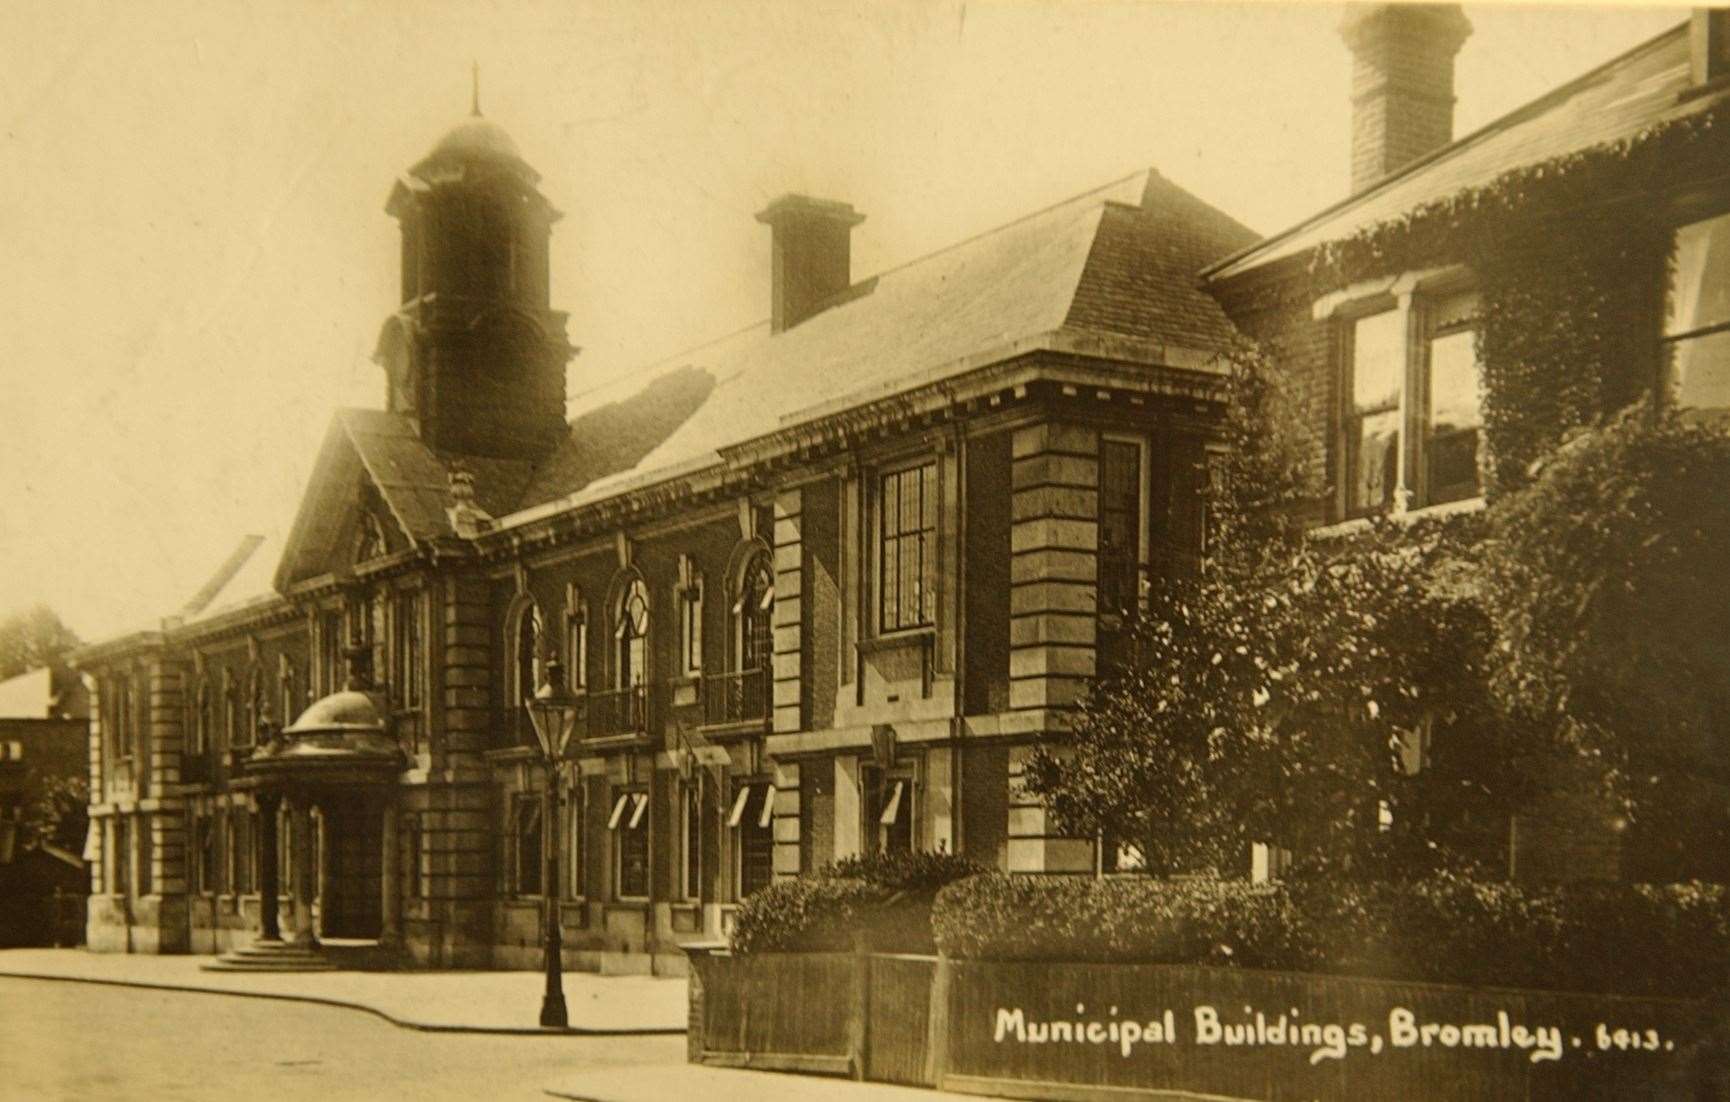 How the building looked in the 1930s